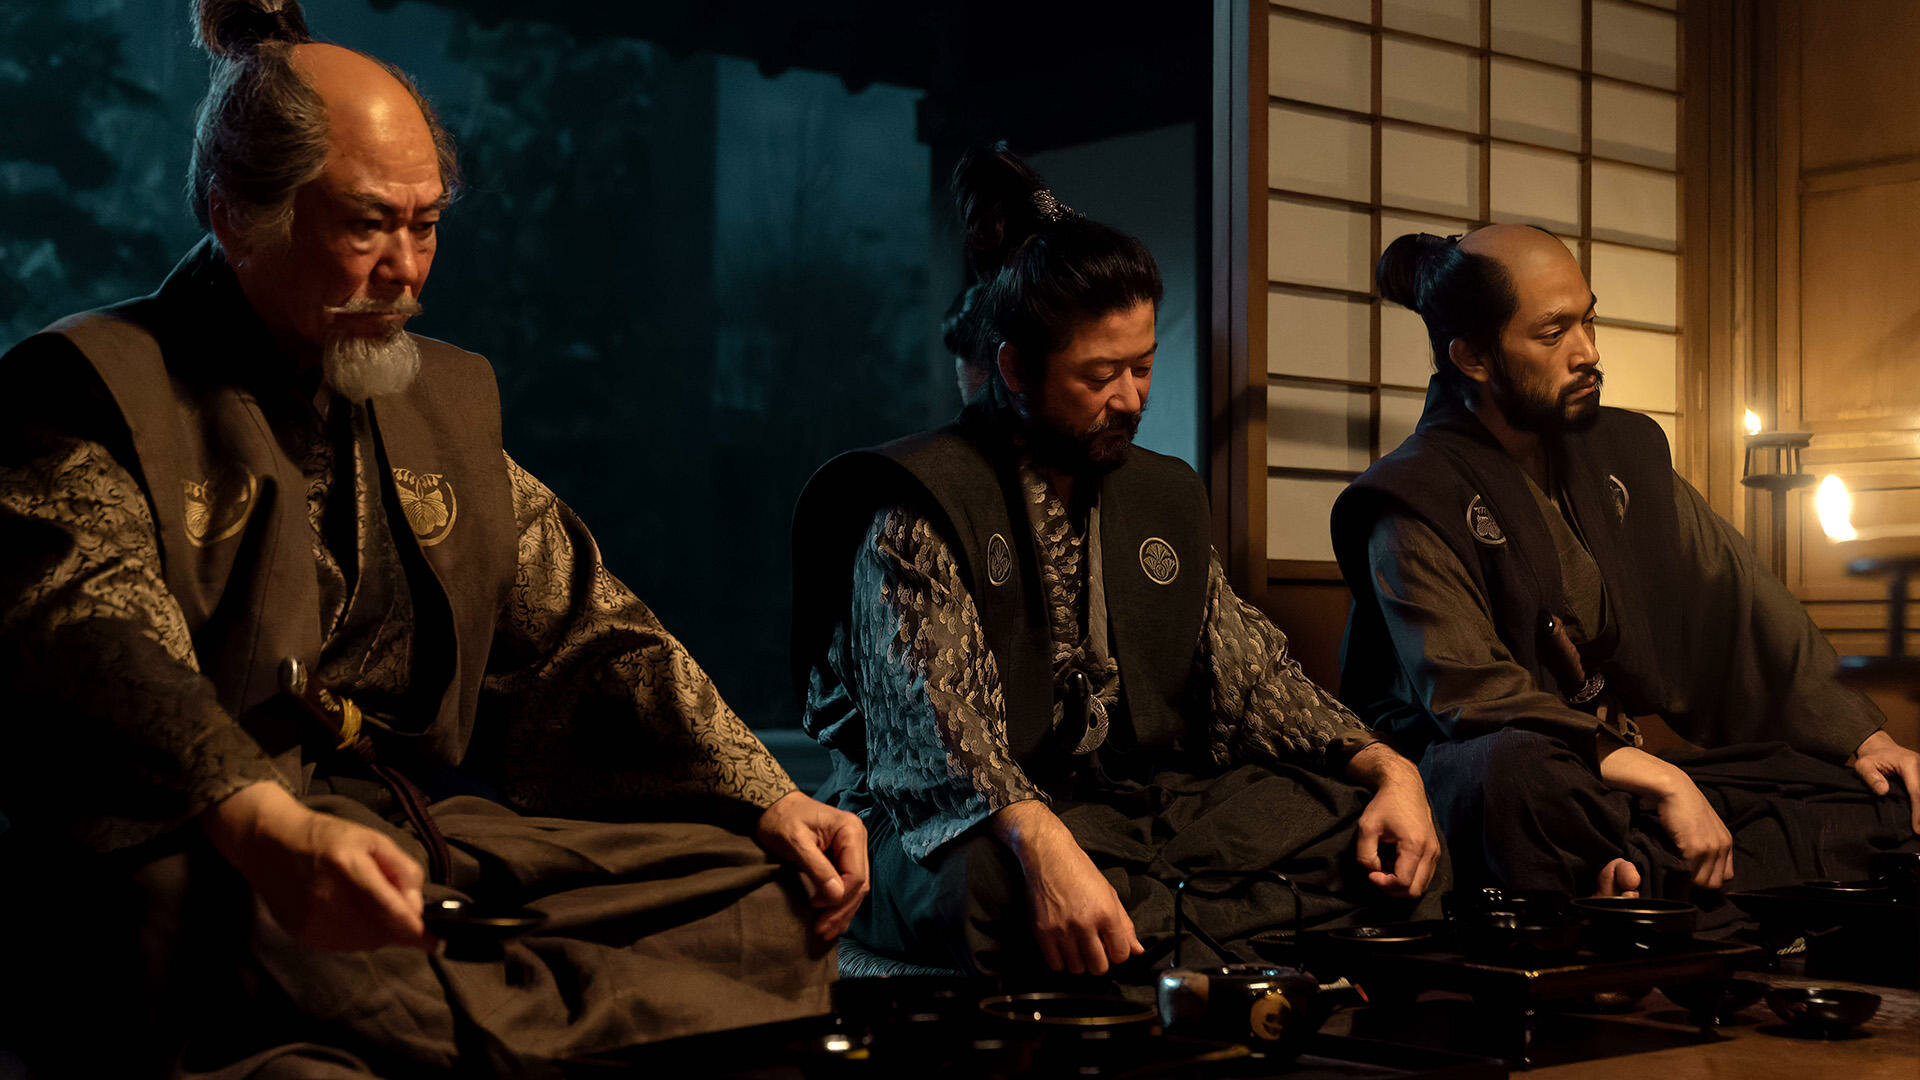 Shogun S1E8 Chapter Eight: The Abyss of Life